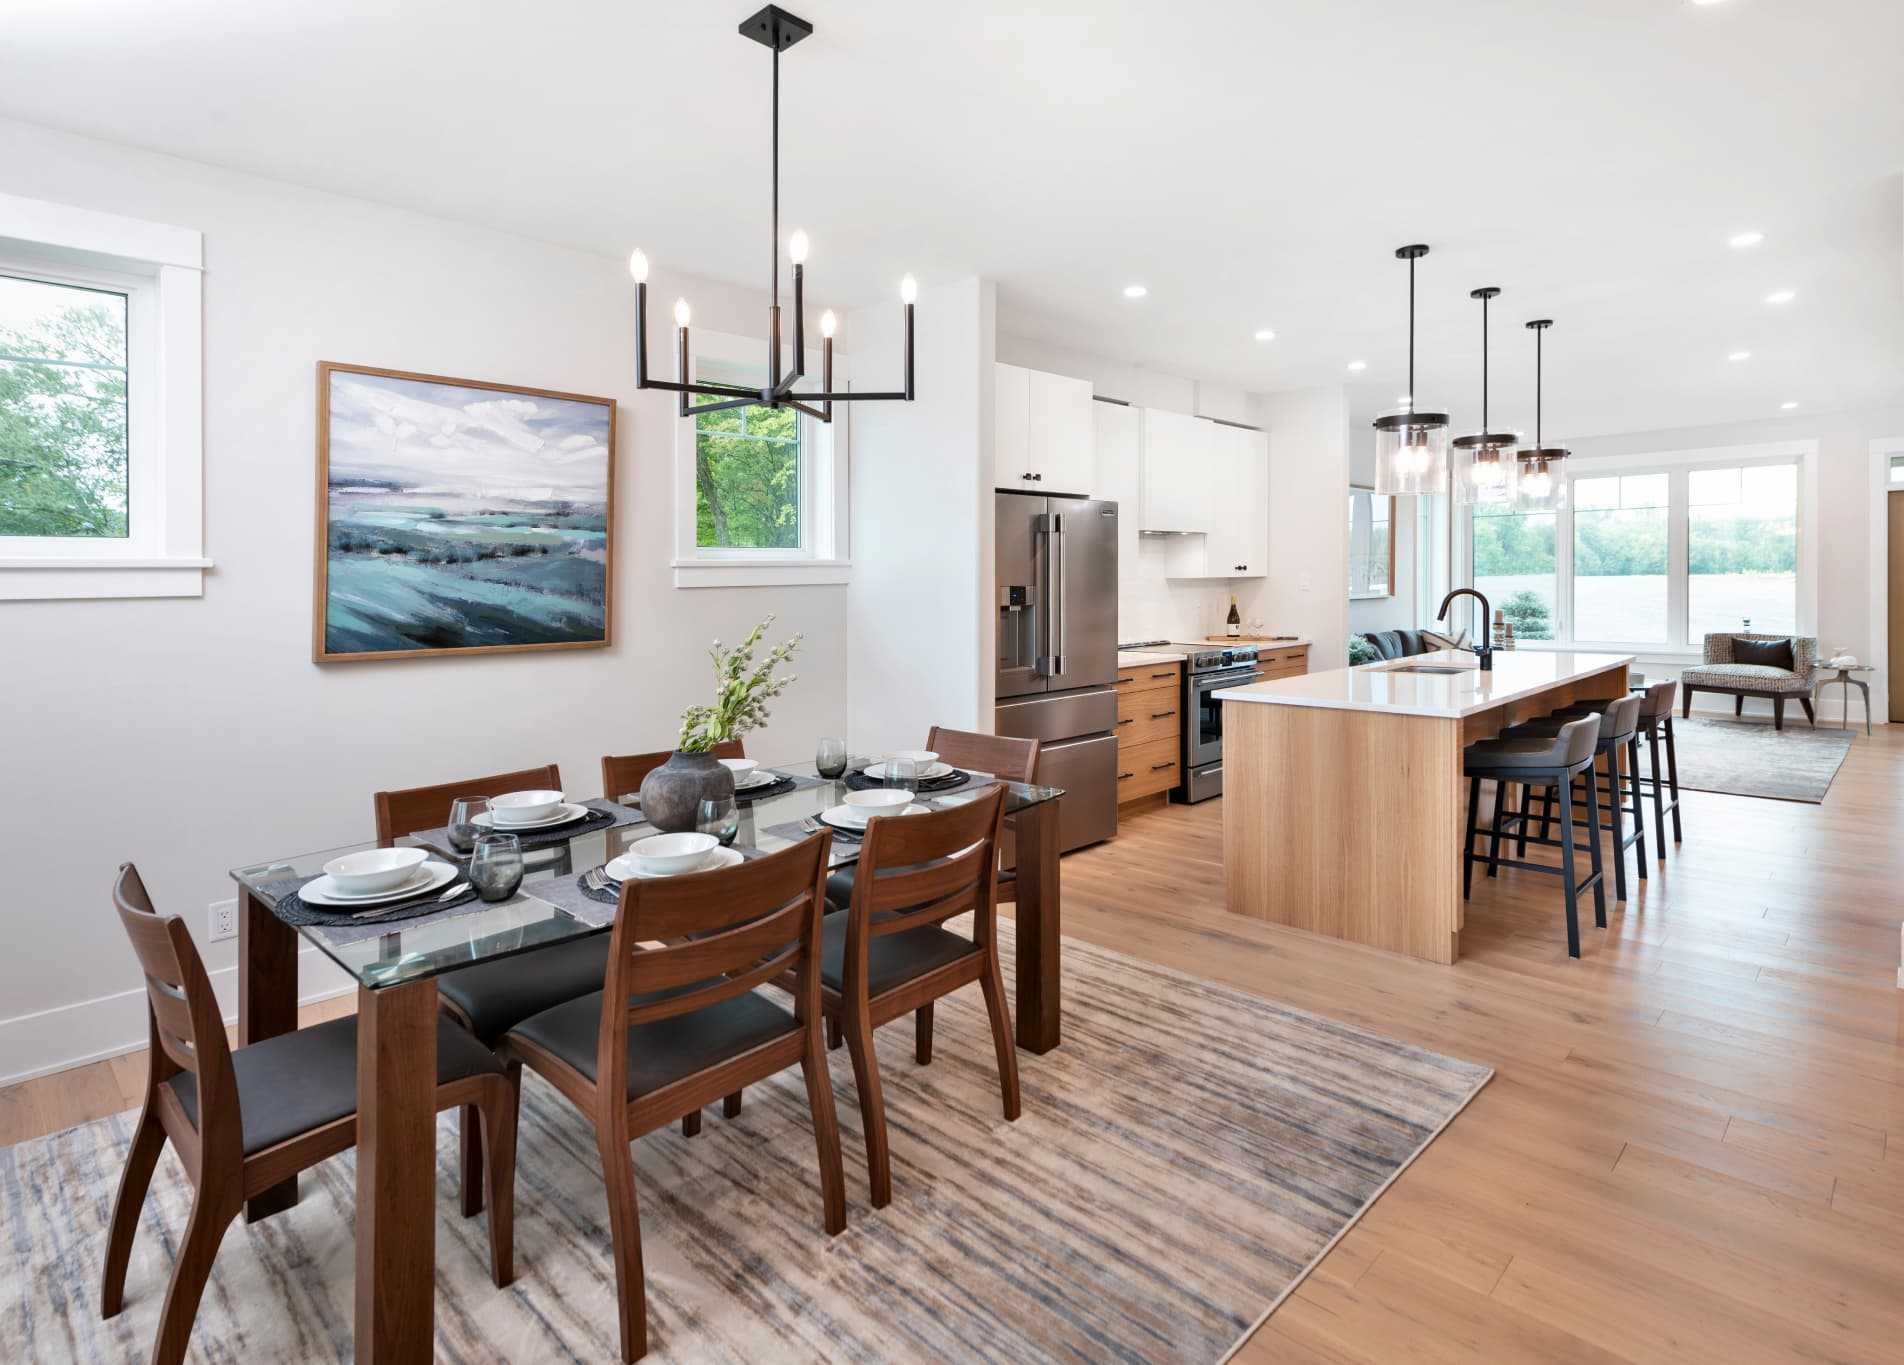 A kitchen and dining room in a home at Watercolour Westport.